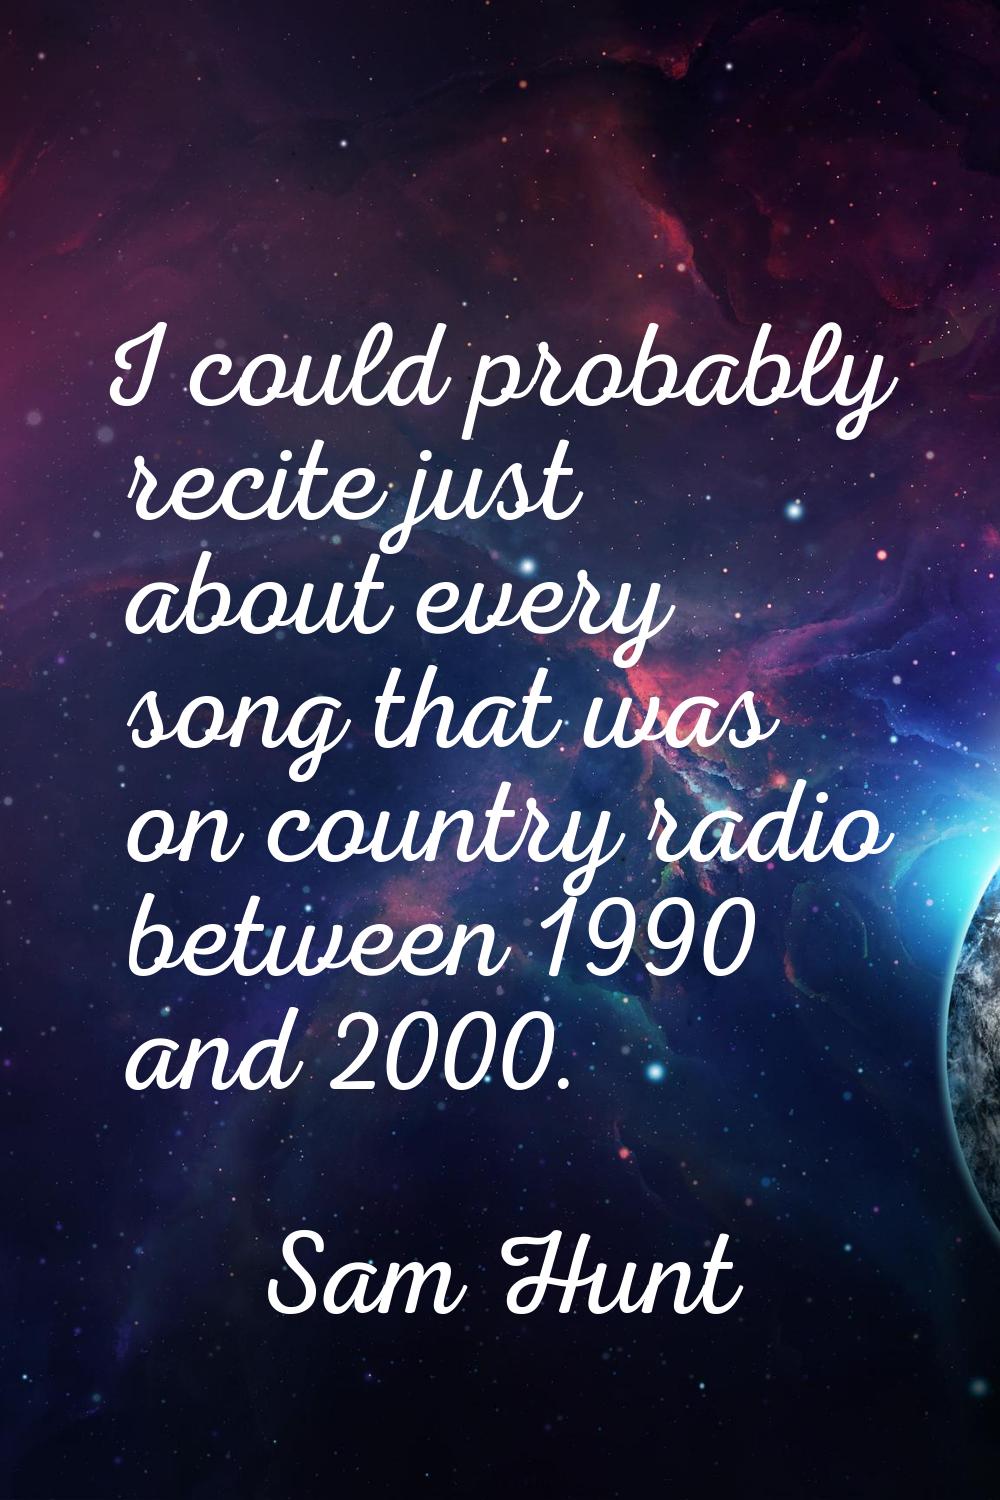 I could probably recite just about every song that was on country radio between 1990 and 2000.